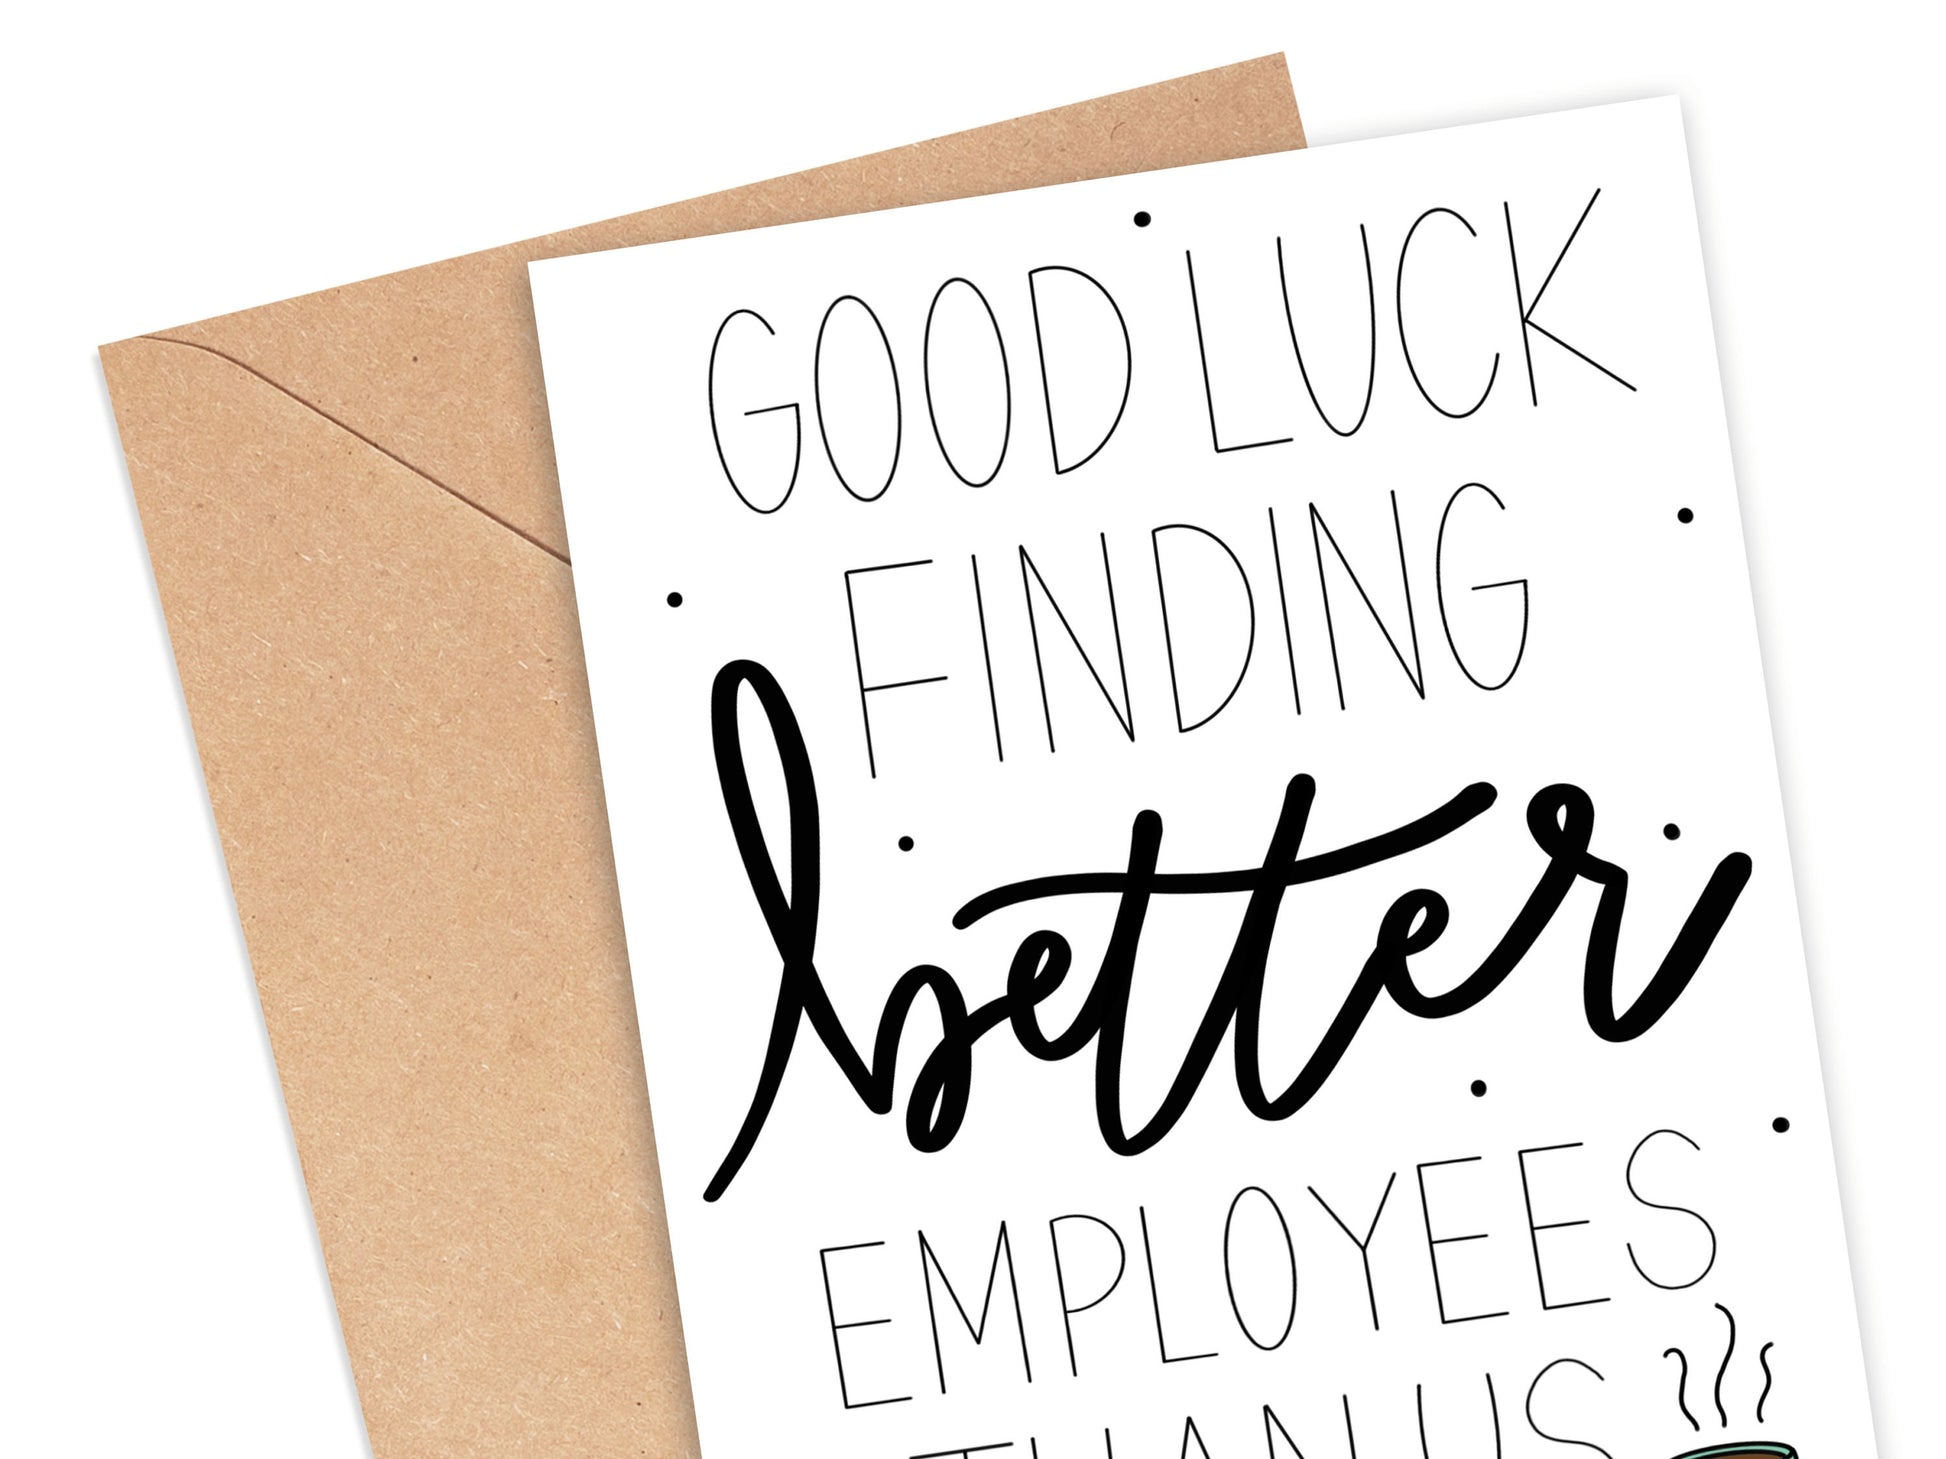 Good Luck Finding Better Employees Than Us Card Simply Happy Cards